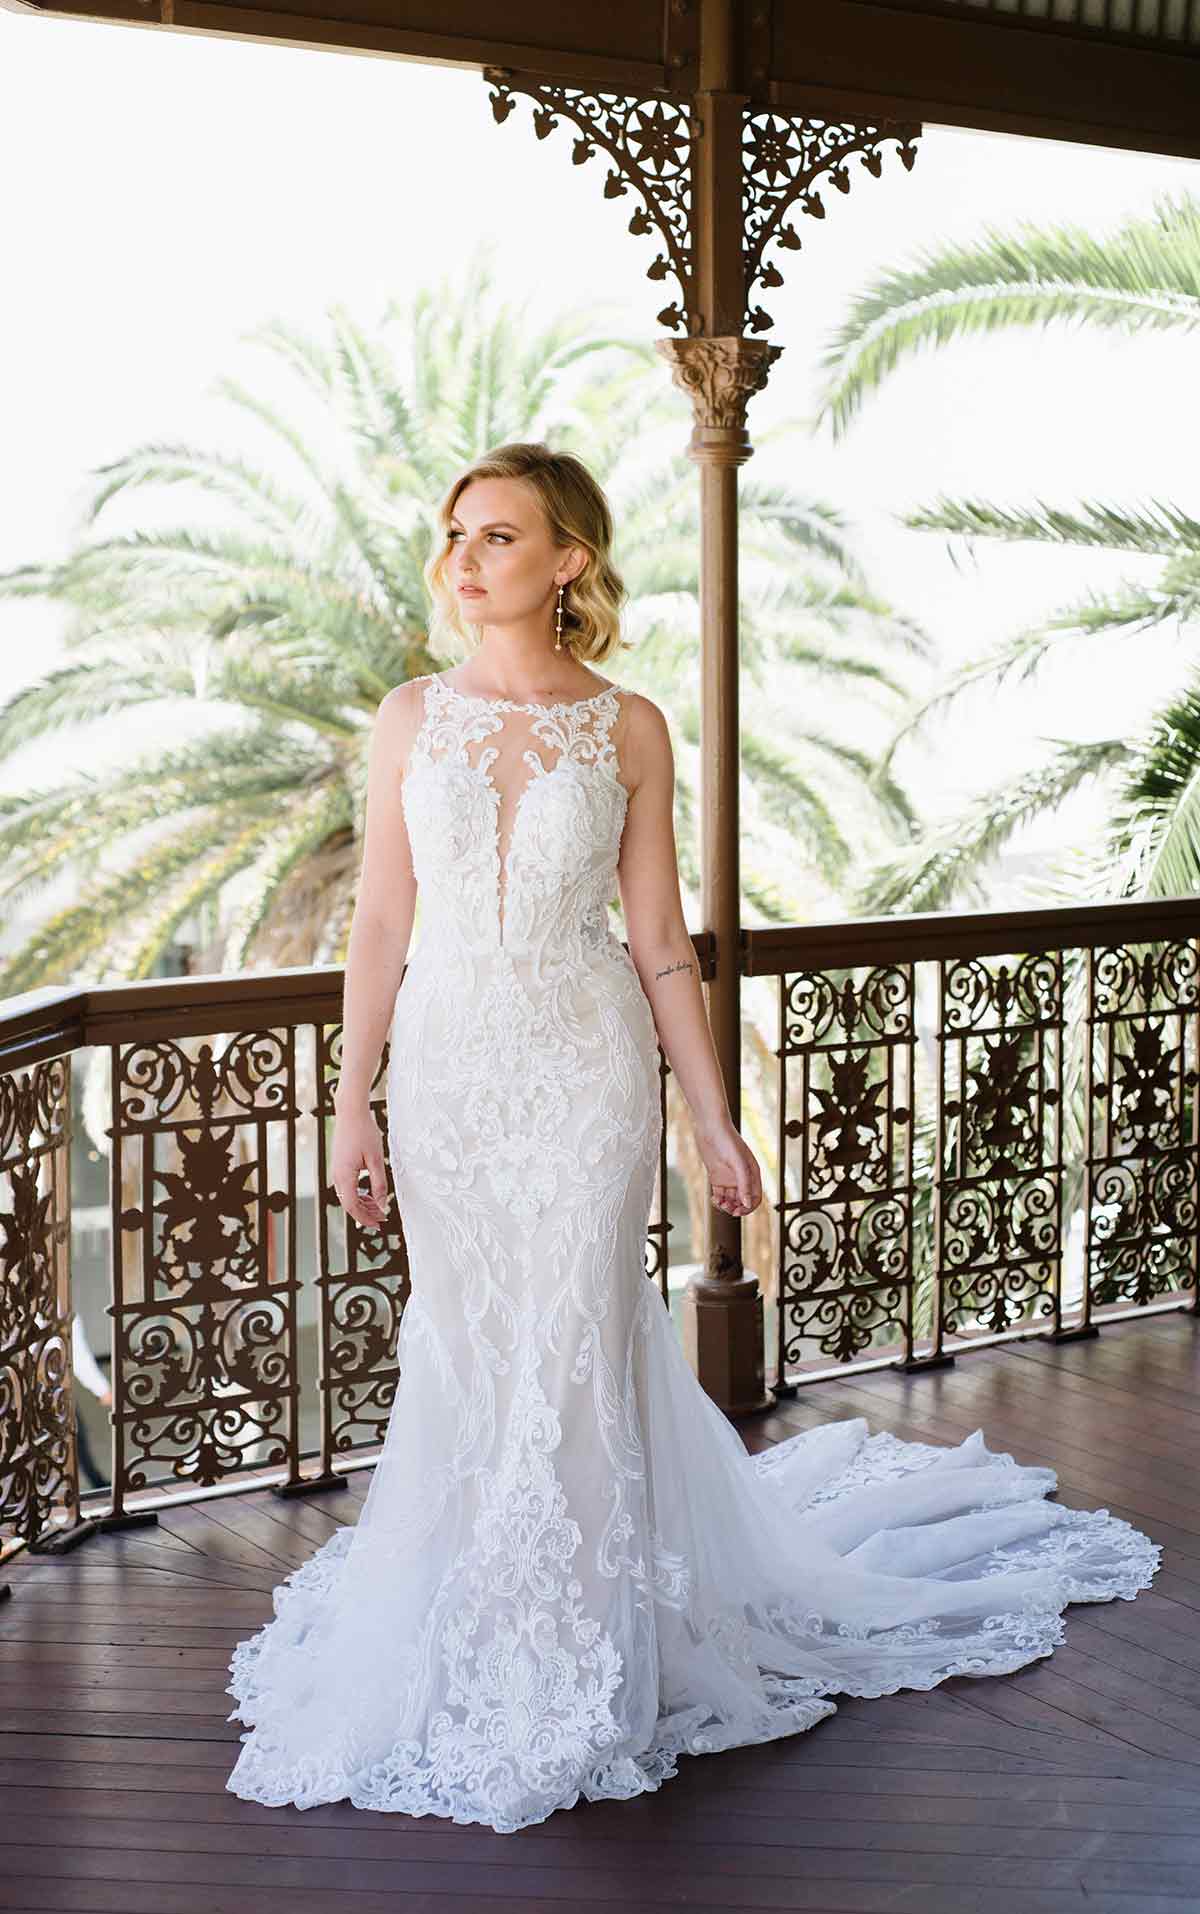 Couture Lace Wedding Dress with High Neckline